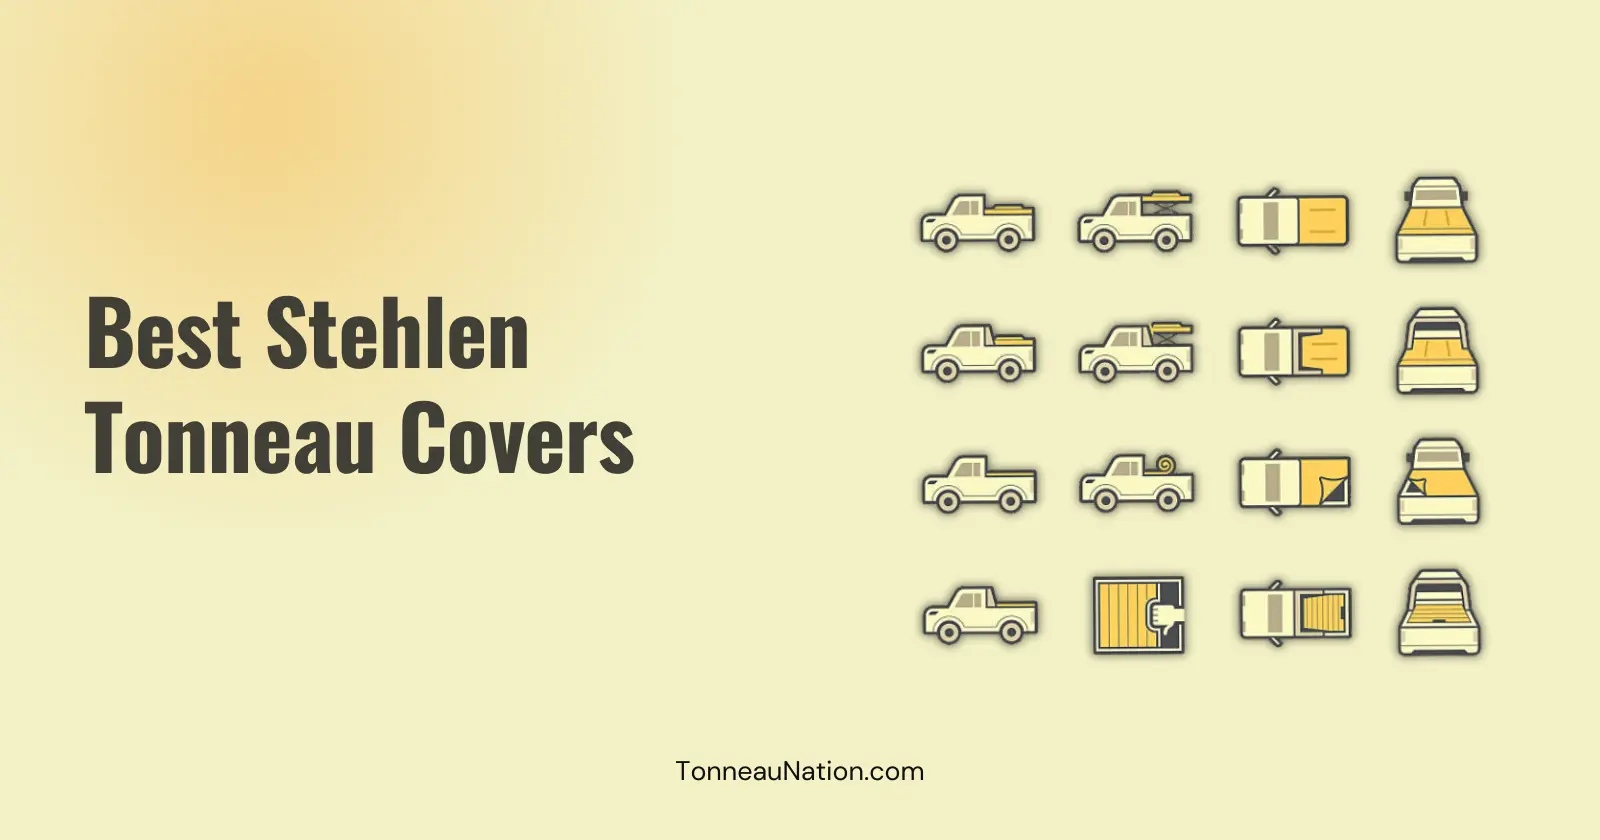 Tonneau cover from Stehlen brand